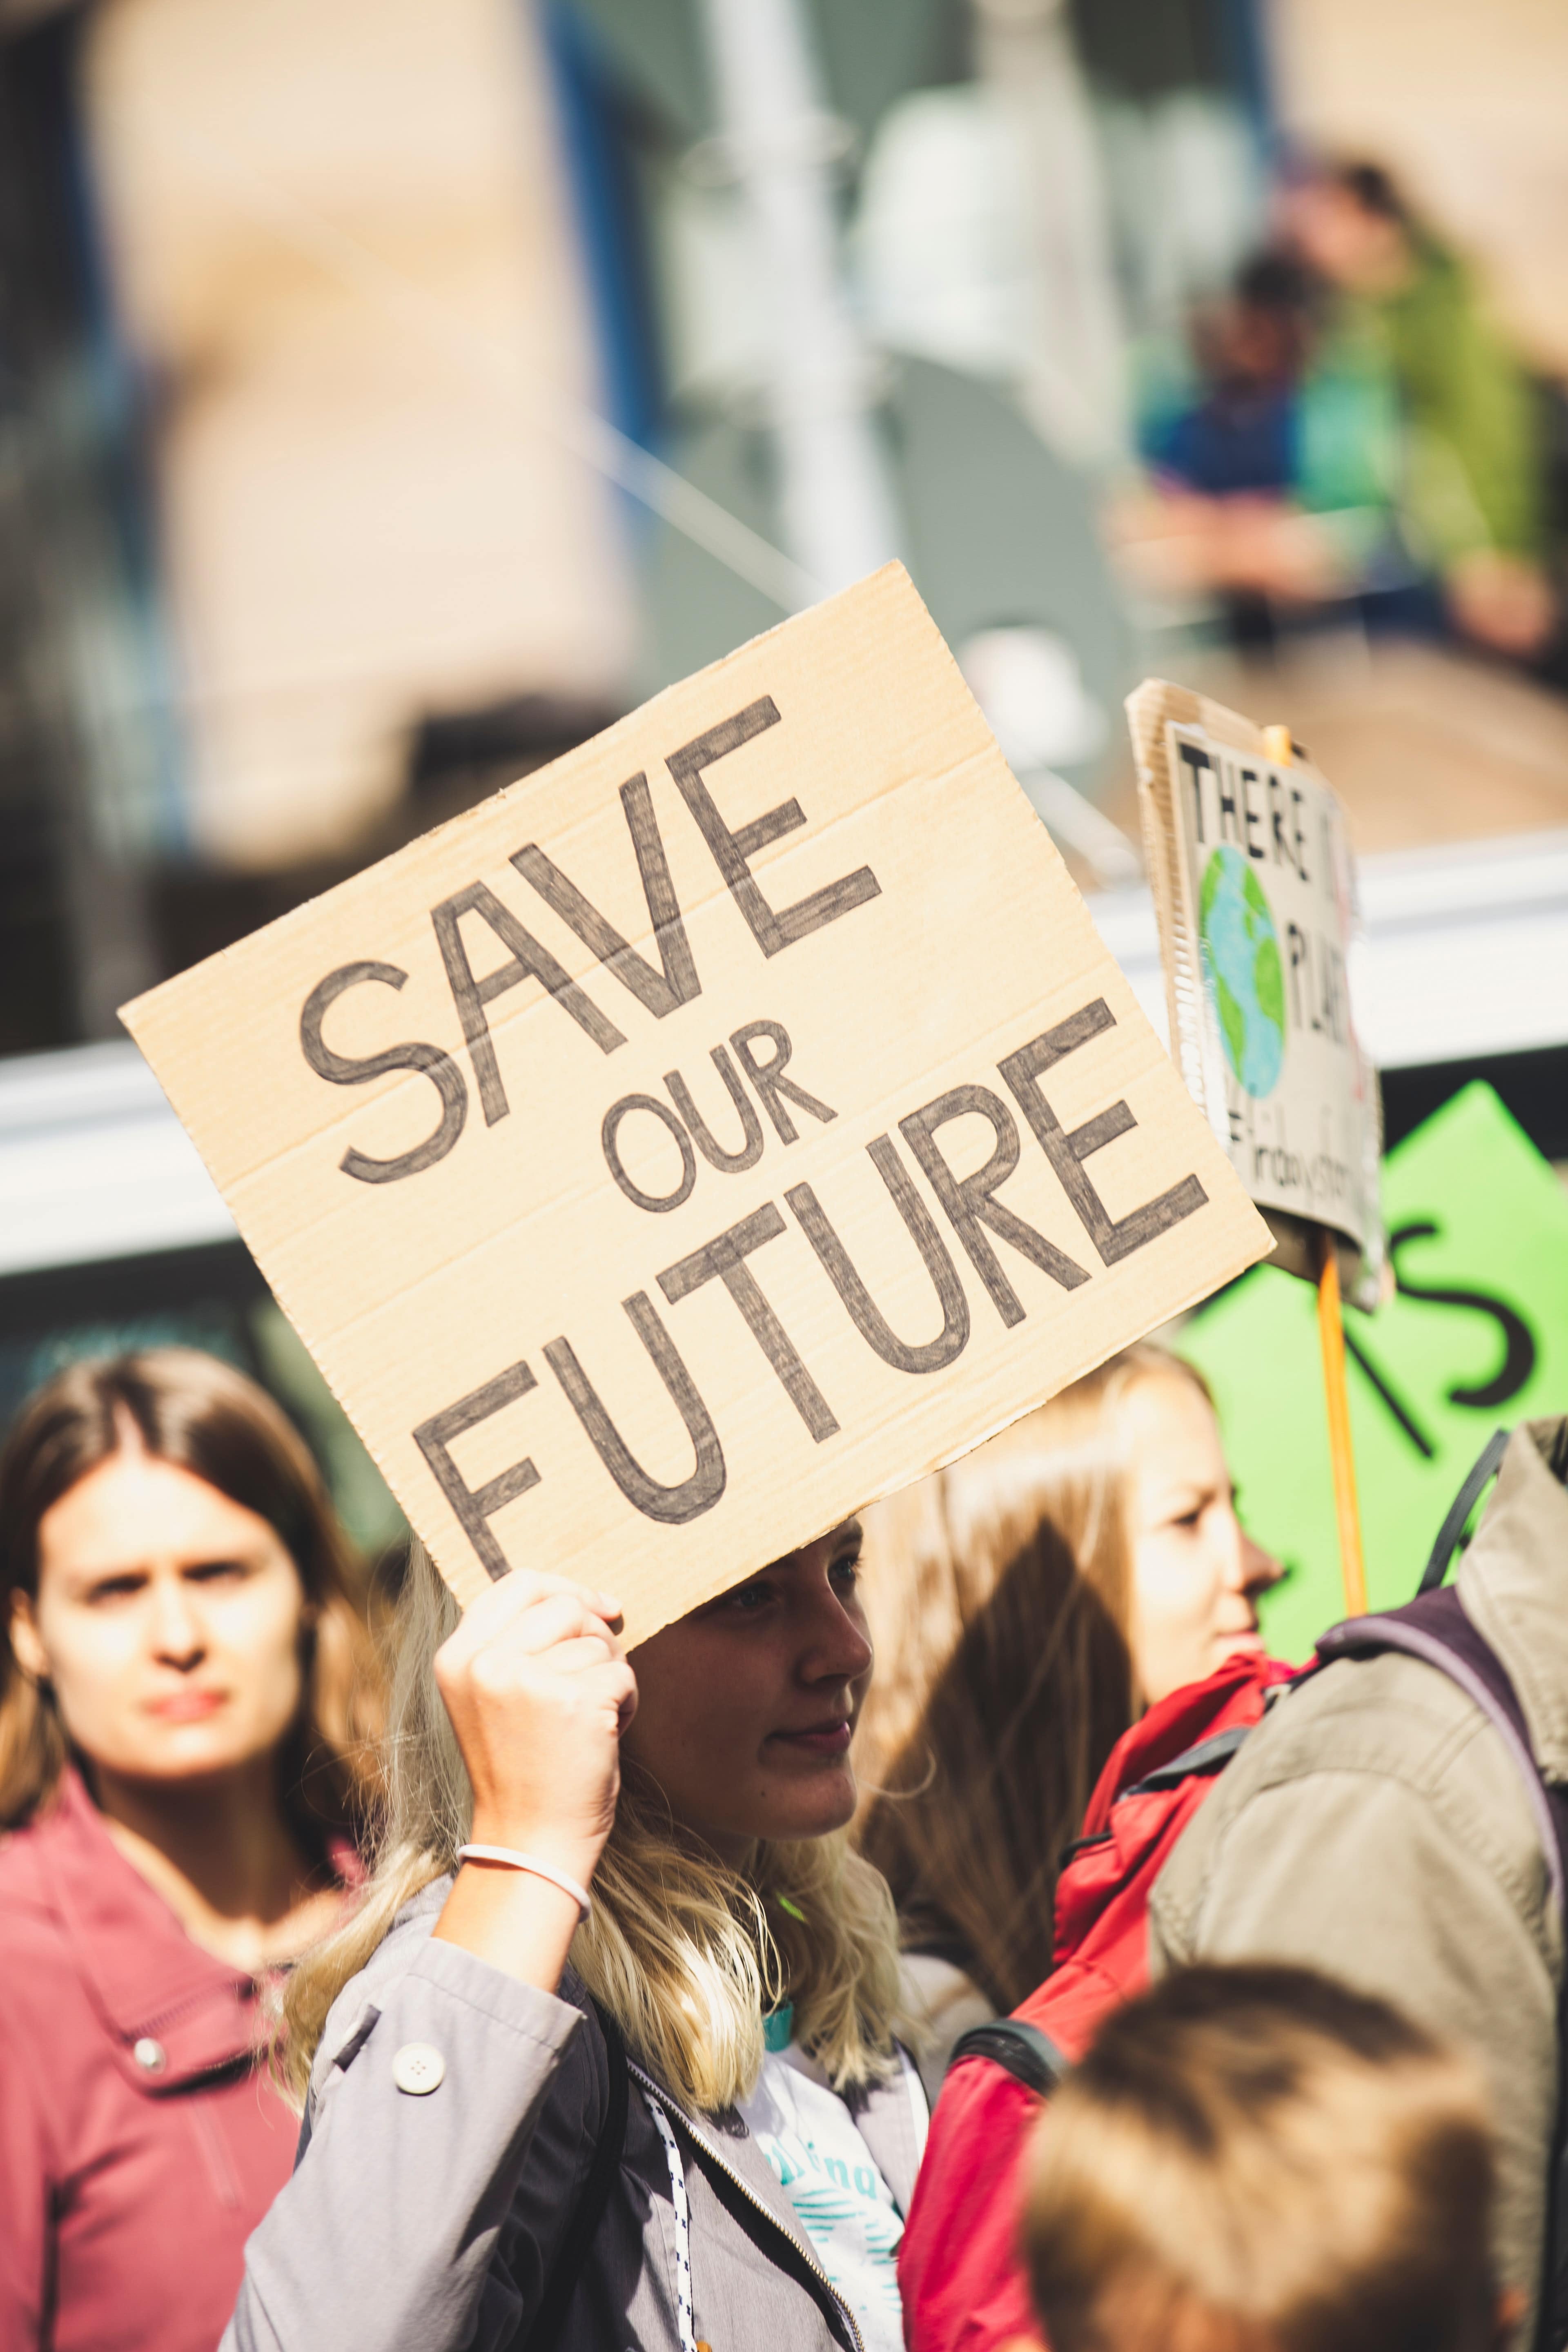 Protester with sign that states "Save Our Future"